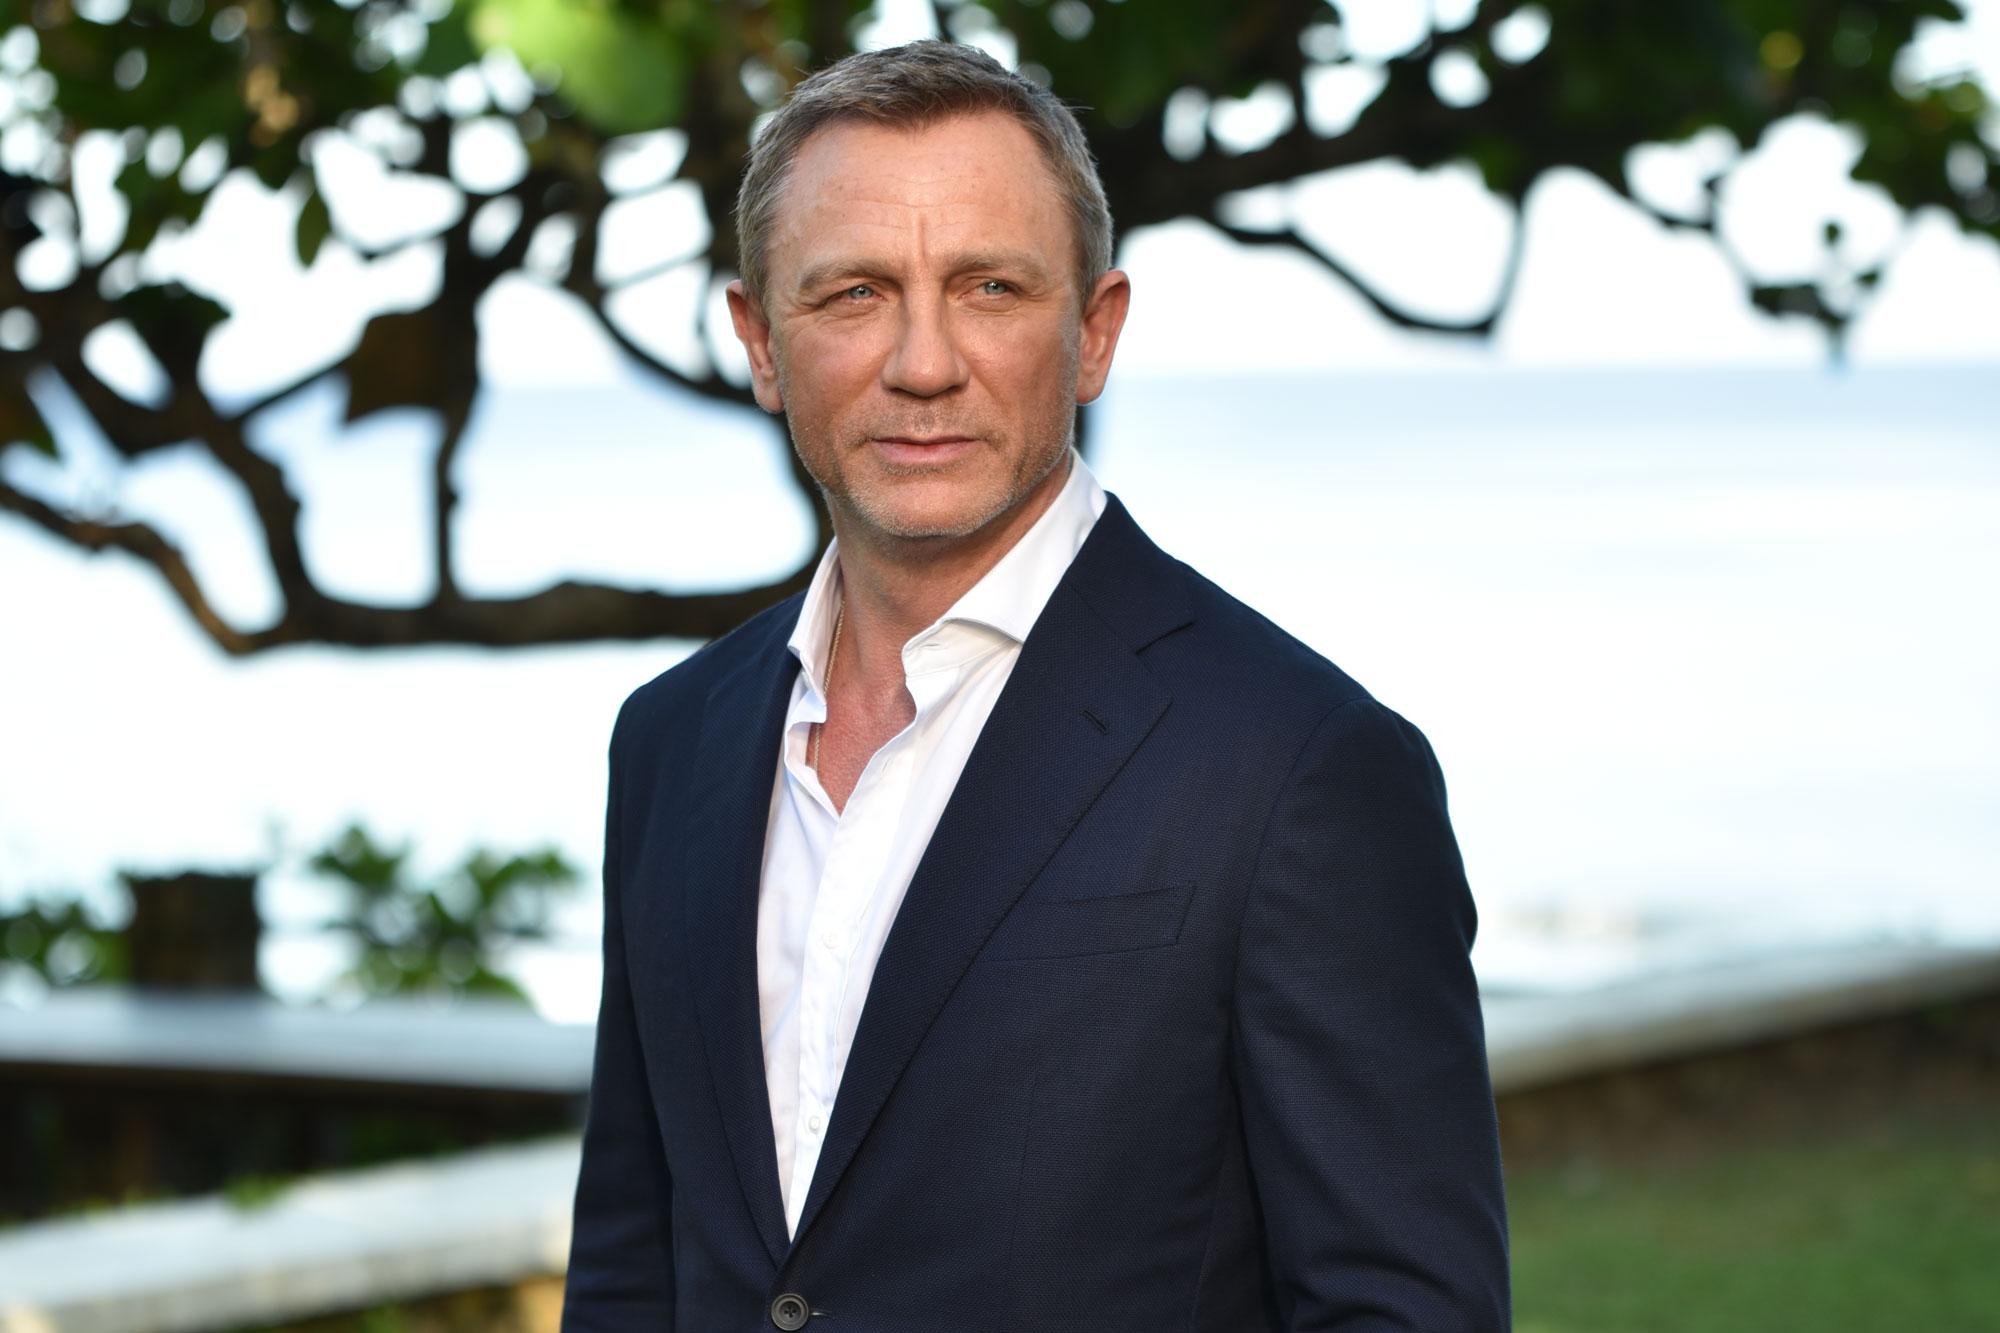 James Bond 25 Title 'No Time to Die' Confirmed